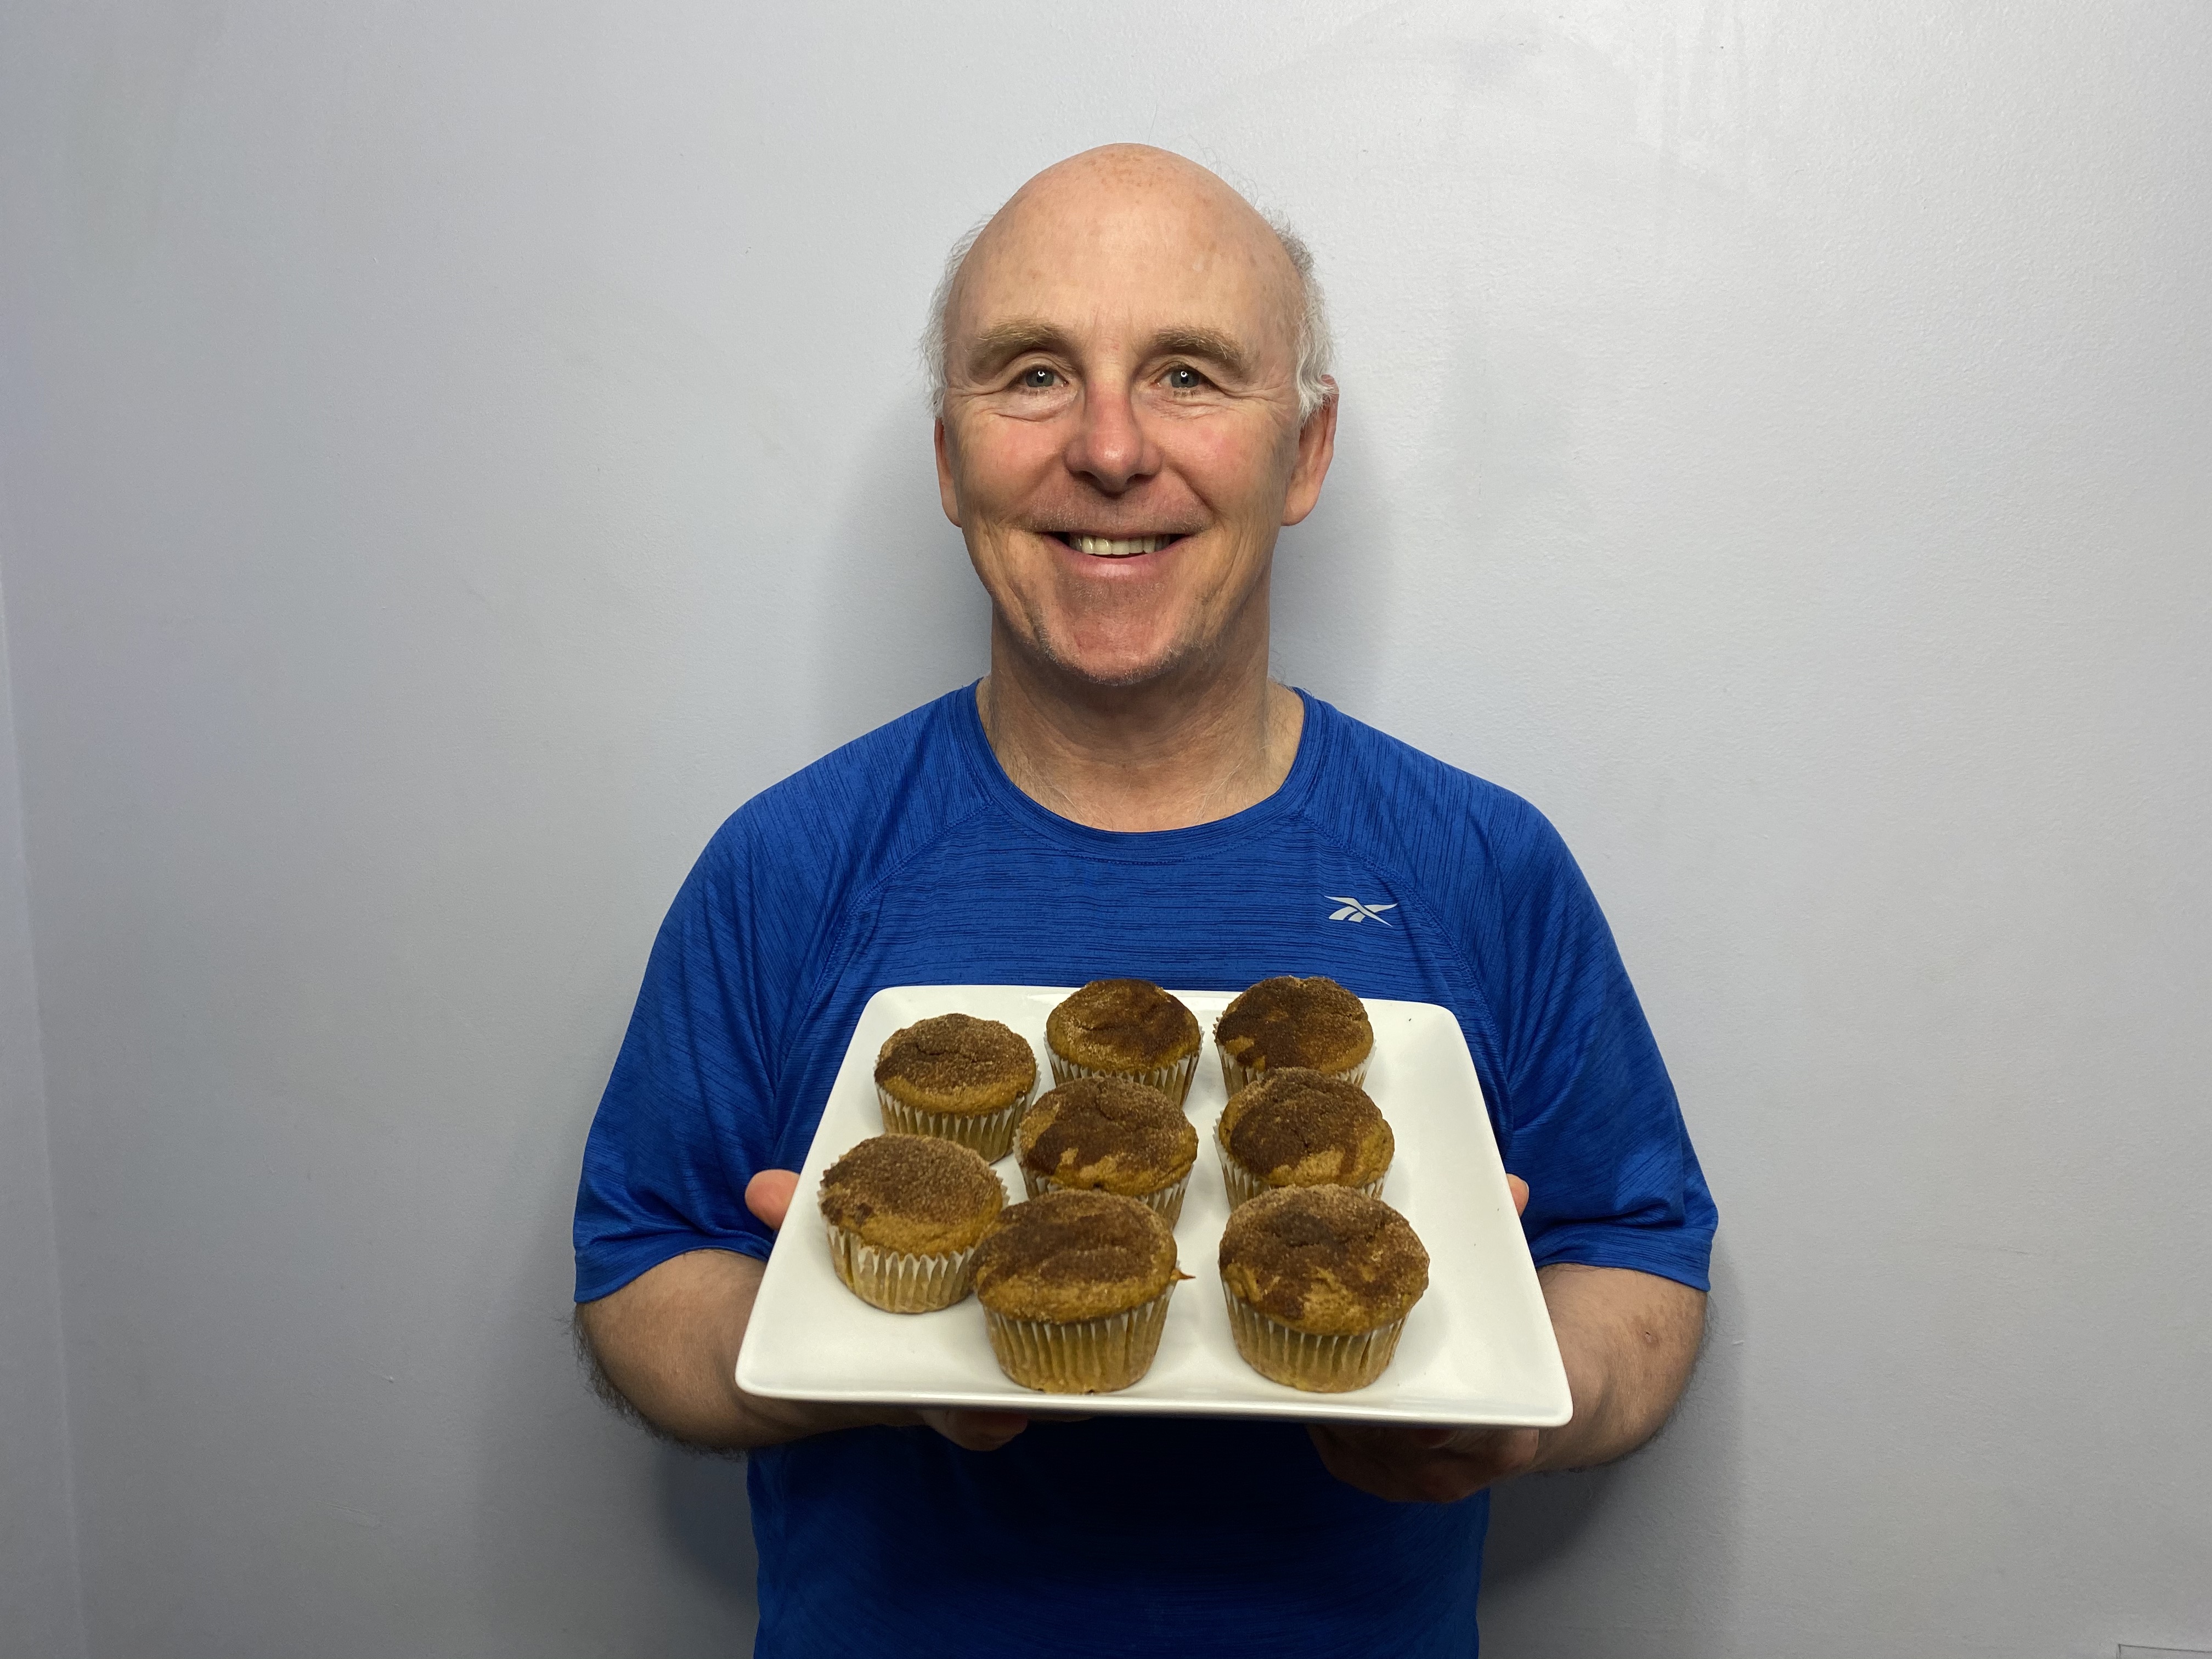 Image of Rob Scott holding a plate of muffins.